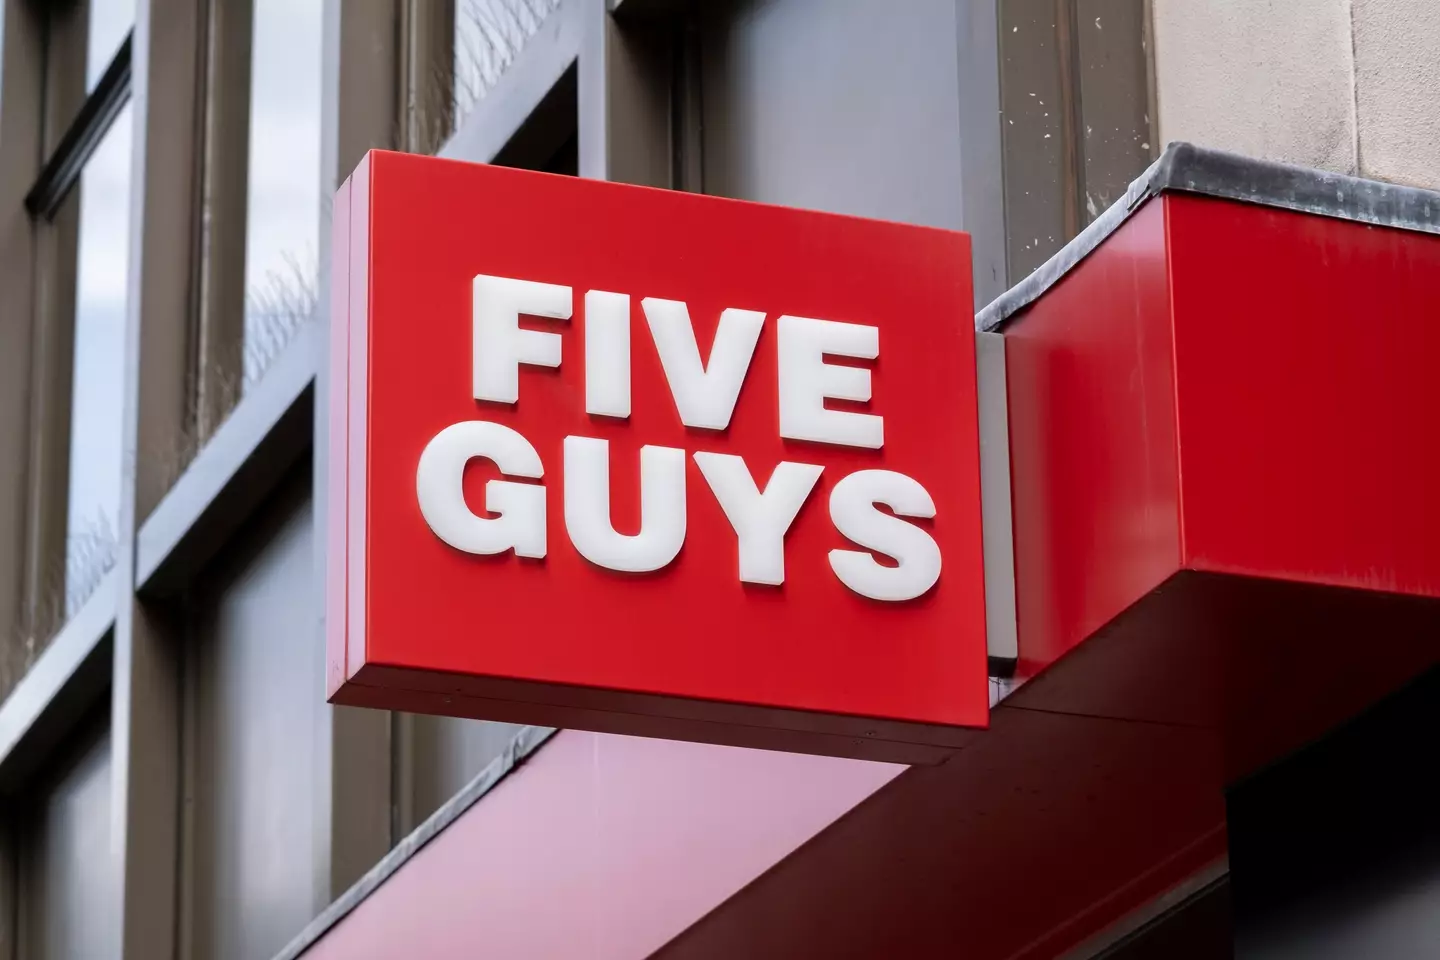 Five Guys is known for being pricey (Mike Kemp/In Pictures via Getty Images)